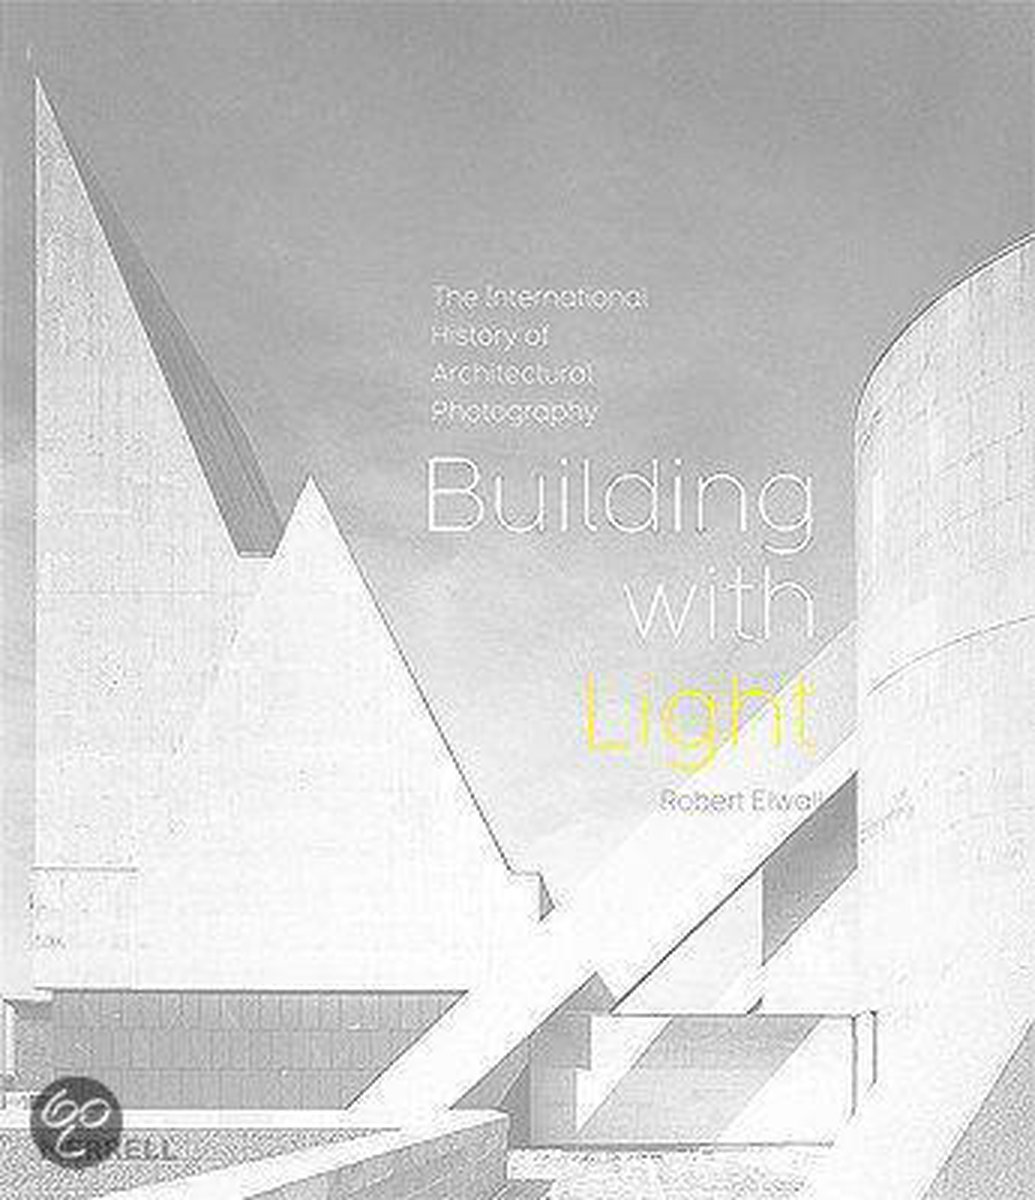 Building With Light